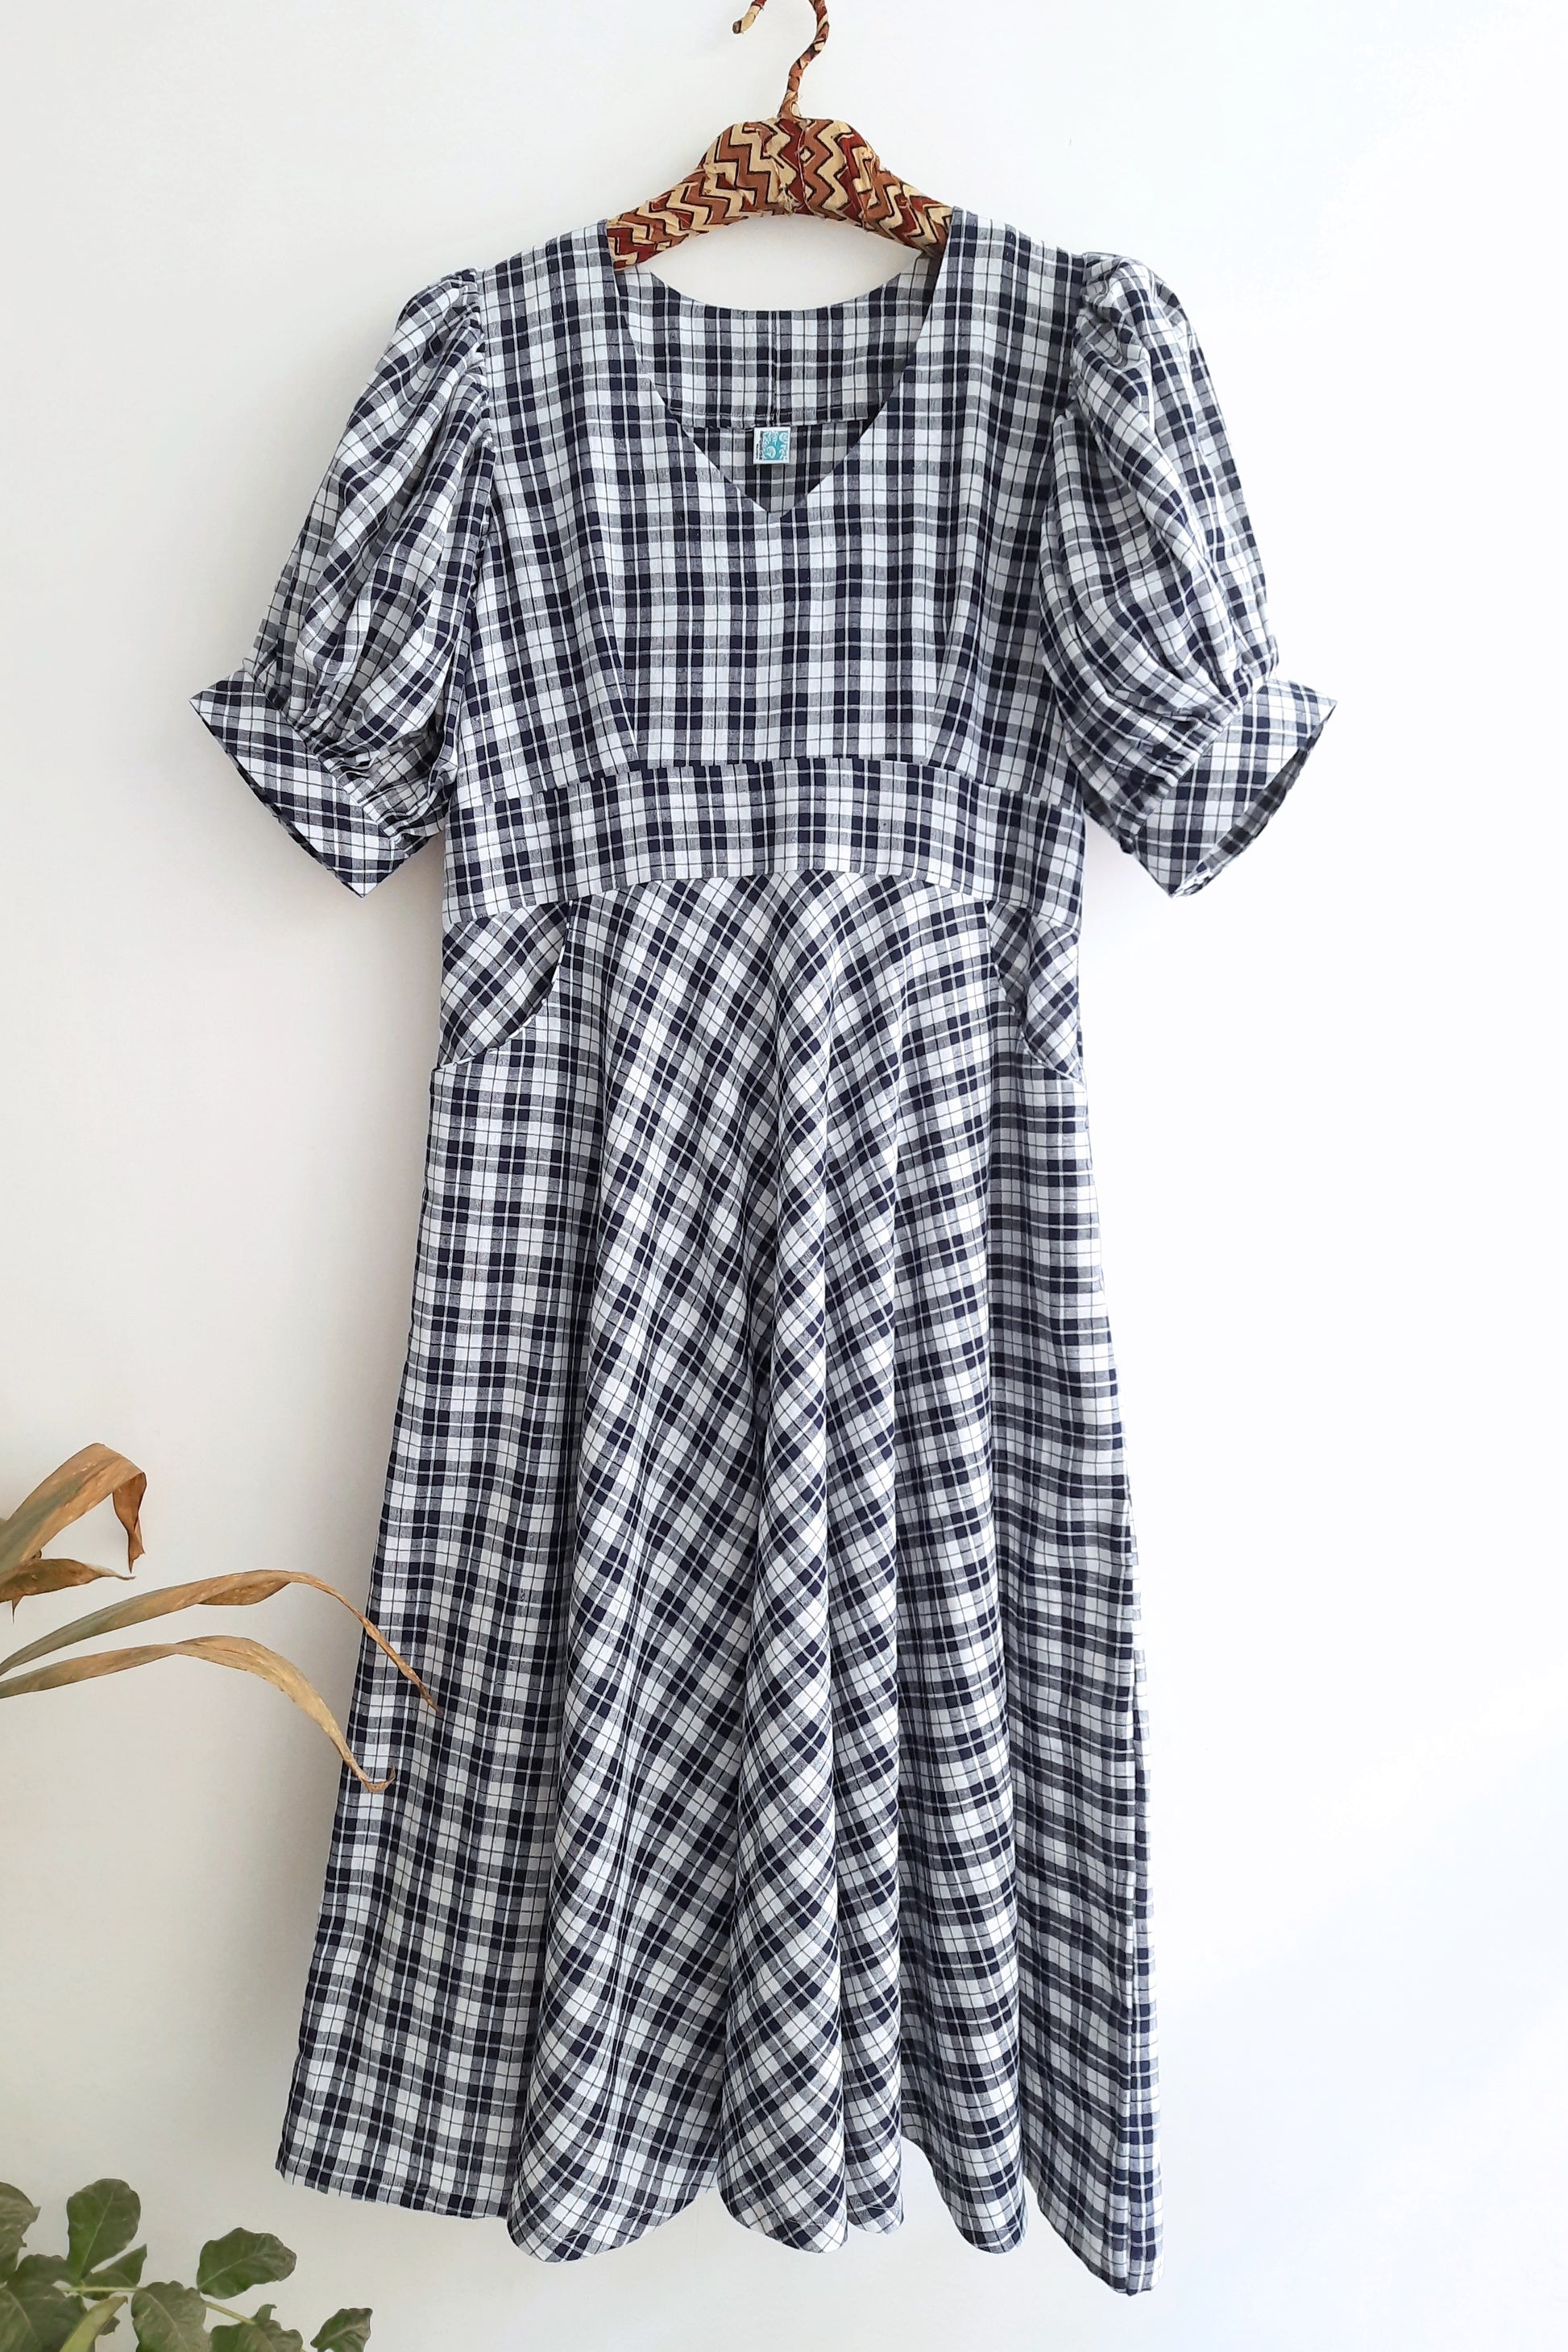 Checkered Dress in Blue & White color for women with V-neck, puffy sleeves, and front pockets, made from sustainable cotton.